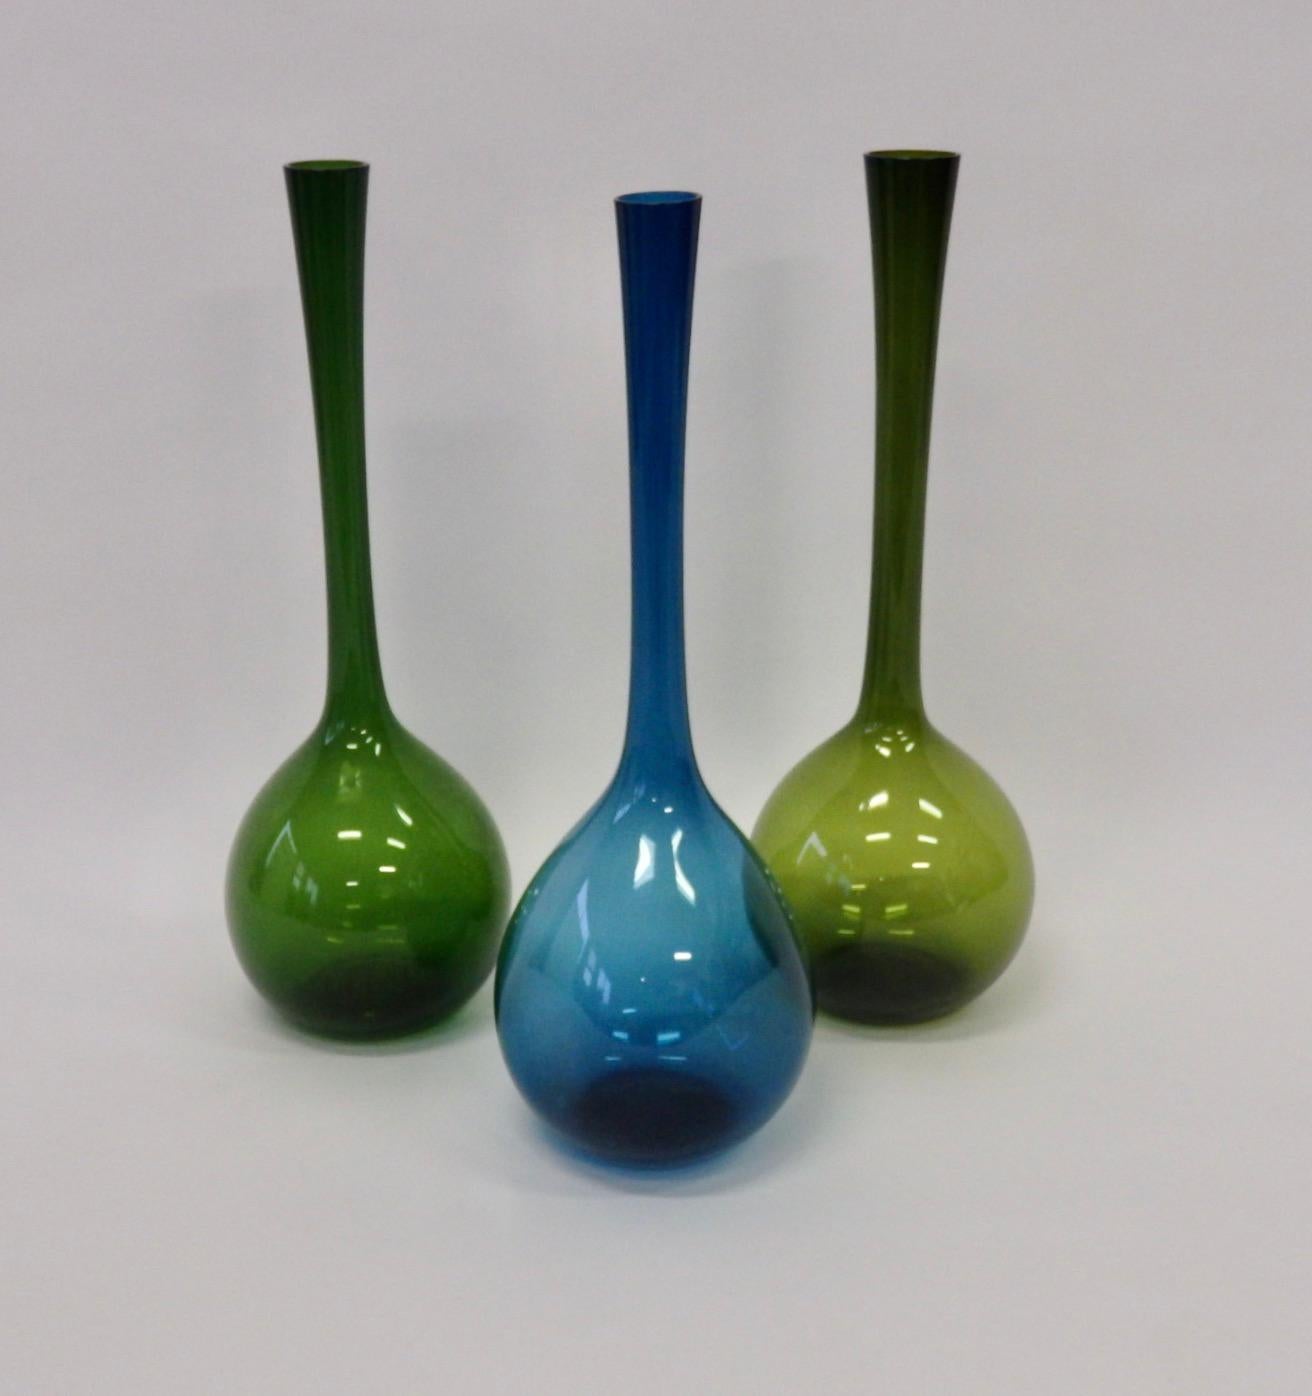 Set of three Arthur Percy bottle vases. Two different shades of green one blue. Blue vase has pinched sides.